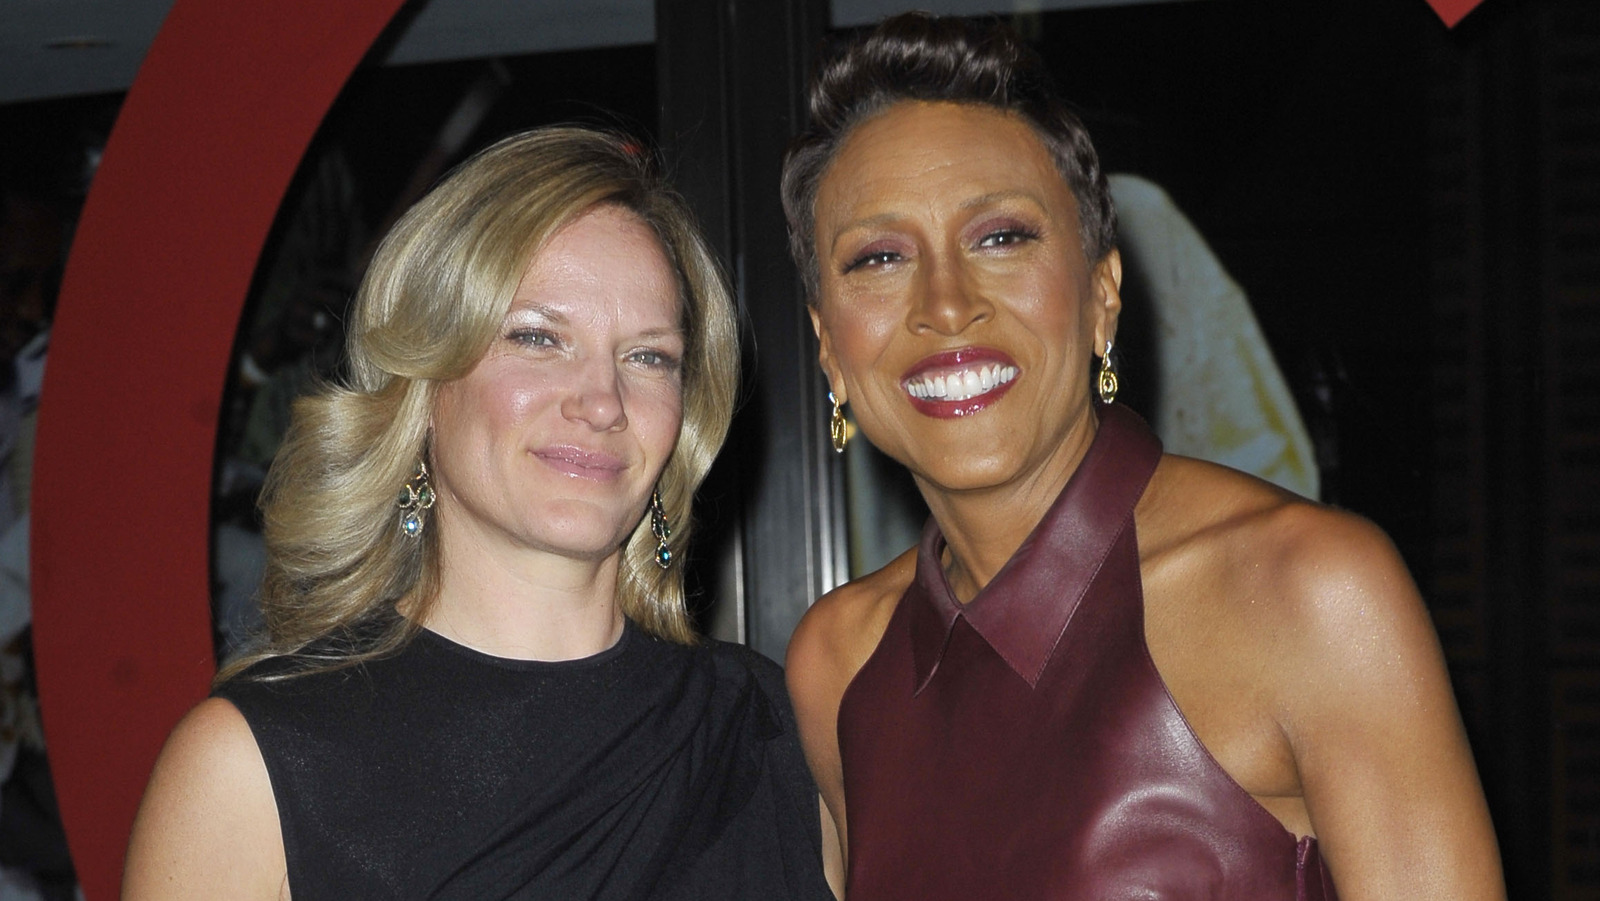 Robin Roberts and Amber Laign Wedding Reception Photos, Details (Exclusive)